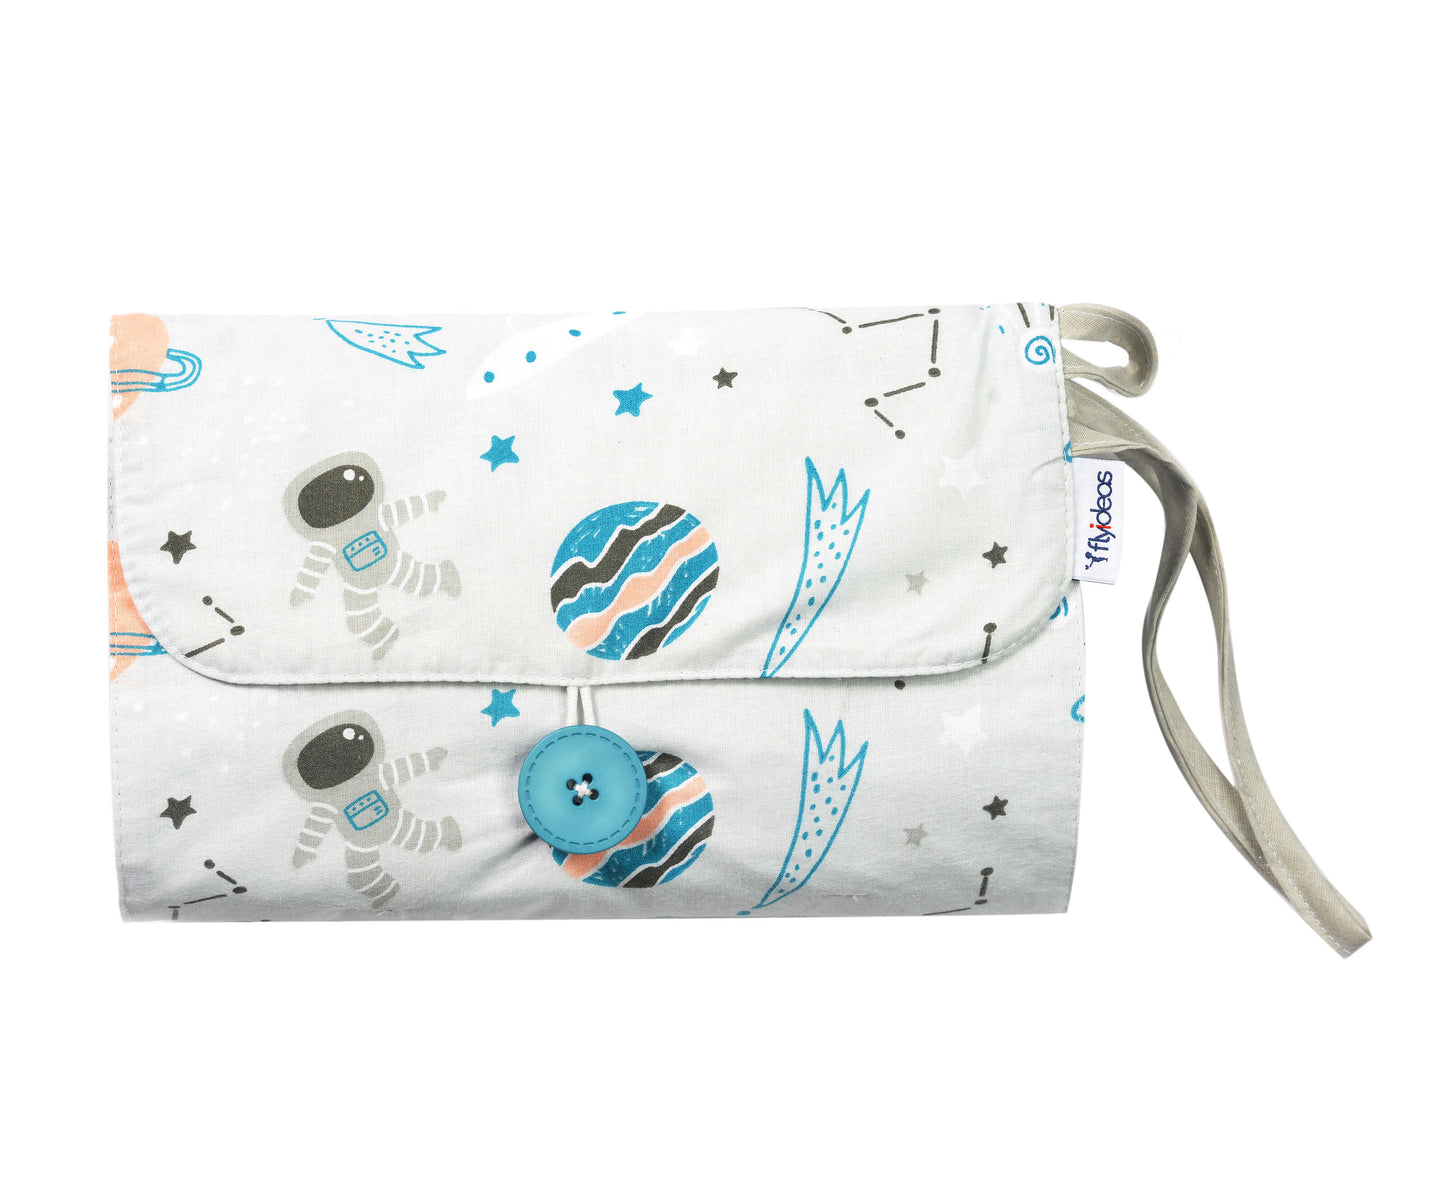 FlyIdeas Diapers Nappies & Wipes Waterproof Organizer, Baby Animals